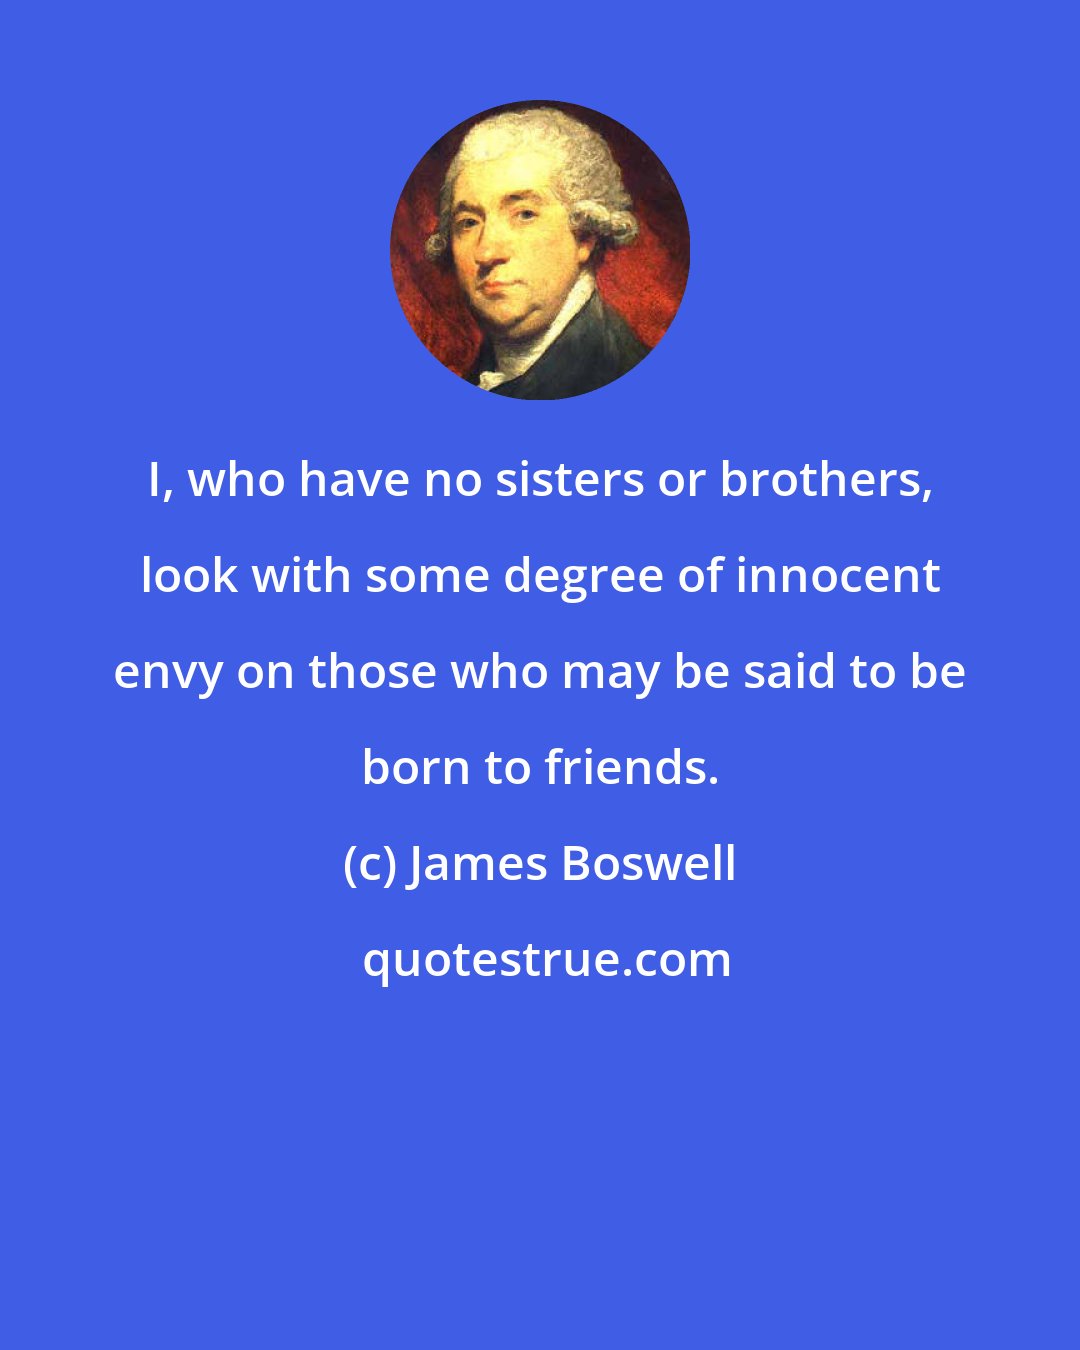 James Boswell: I, who have no sisters or brothers, look with some degree of innocent envy on those who may be said to be born to friends.